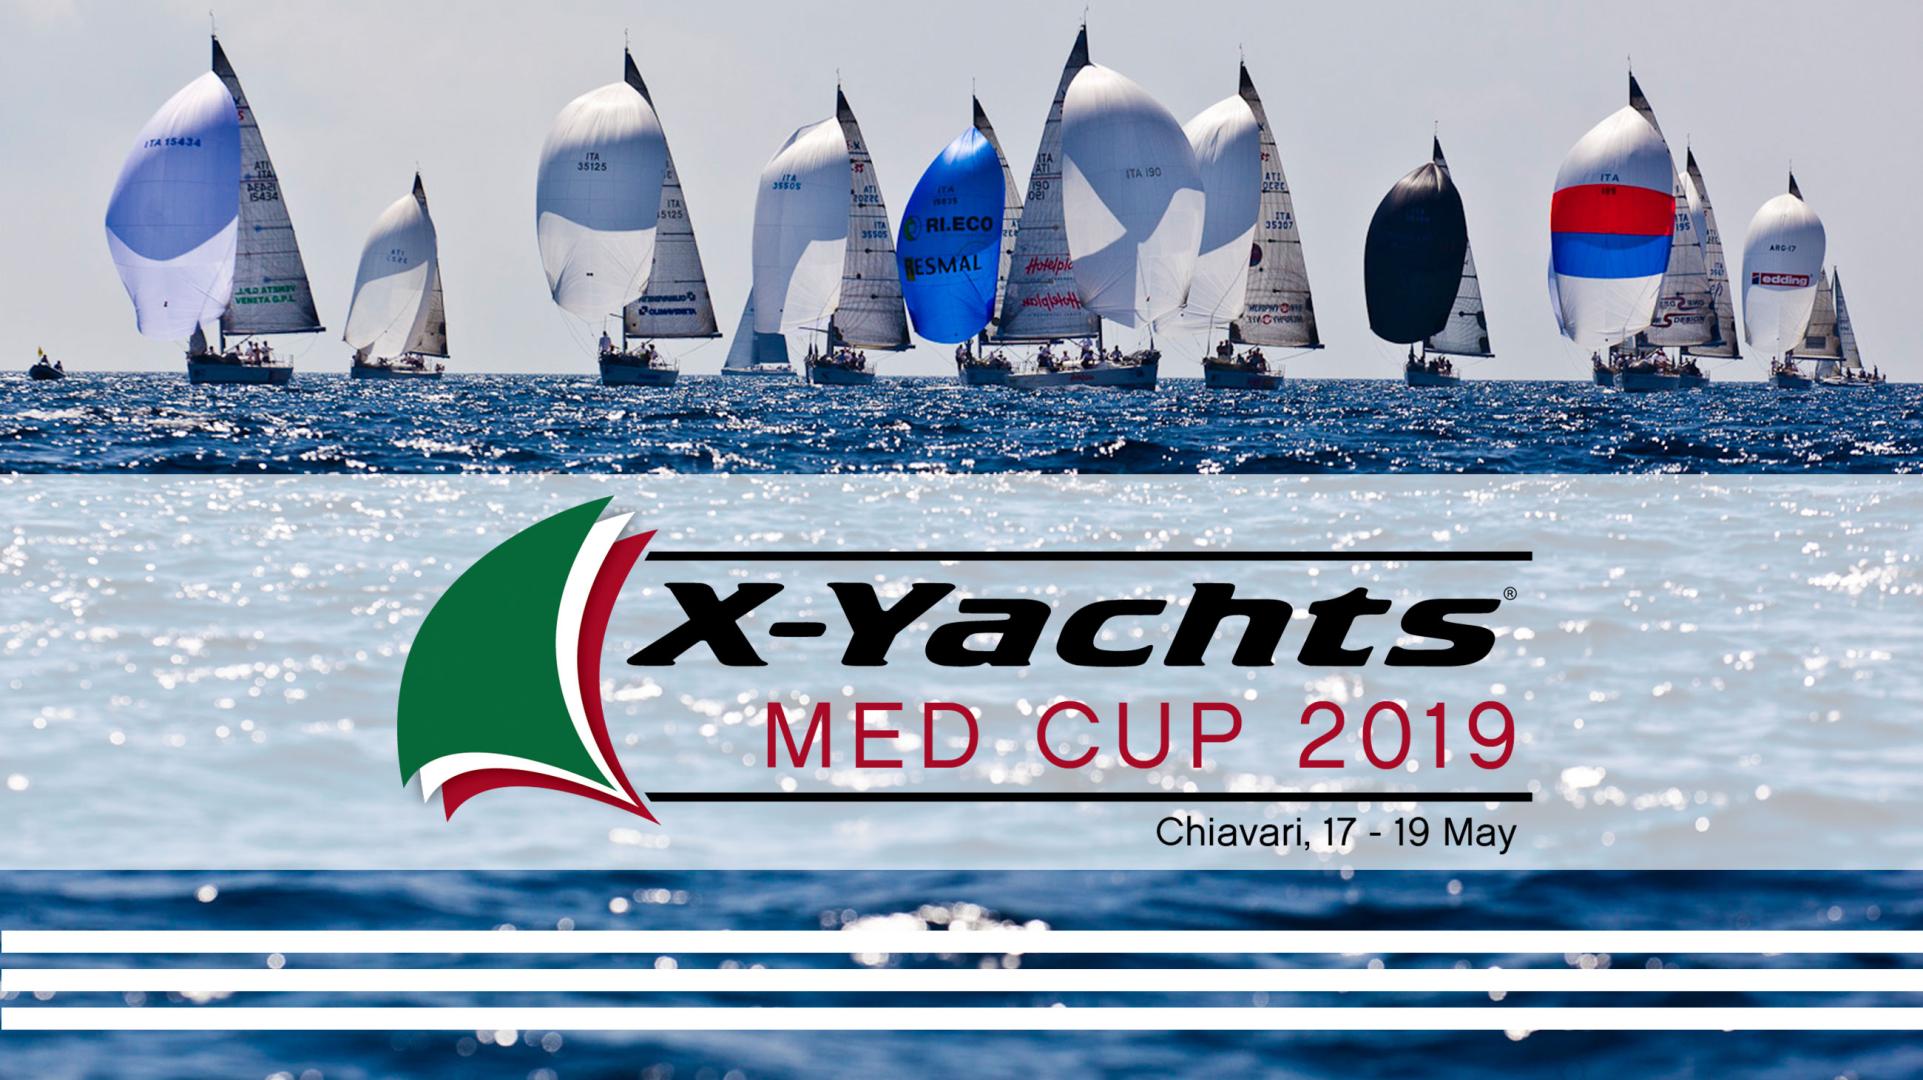 X-Yachts Med Cup